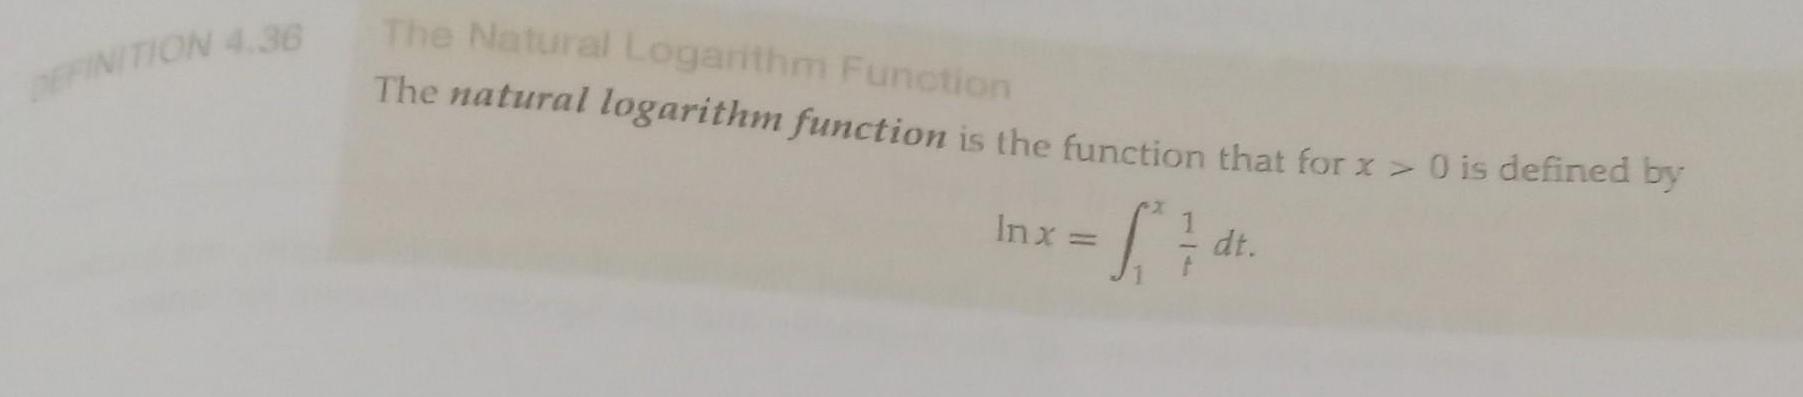 DEFINITION 4.36 The Natural Logarithm Function The natural logarithm function is the function that for x > 0